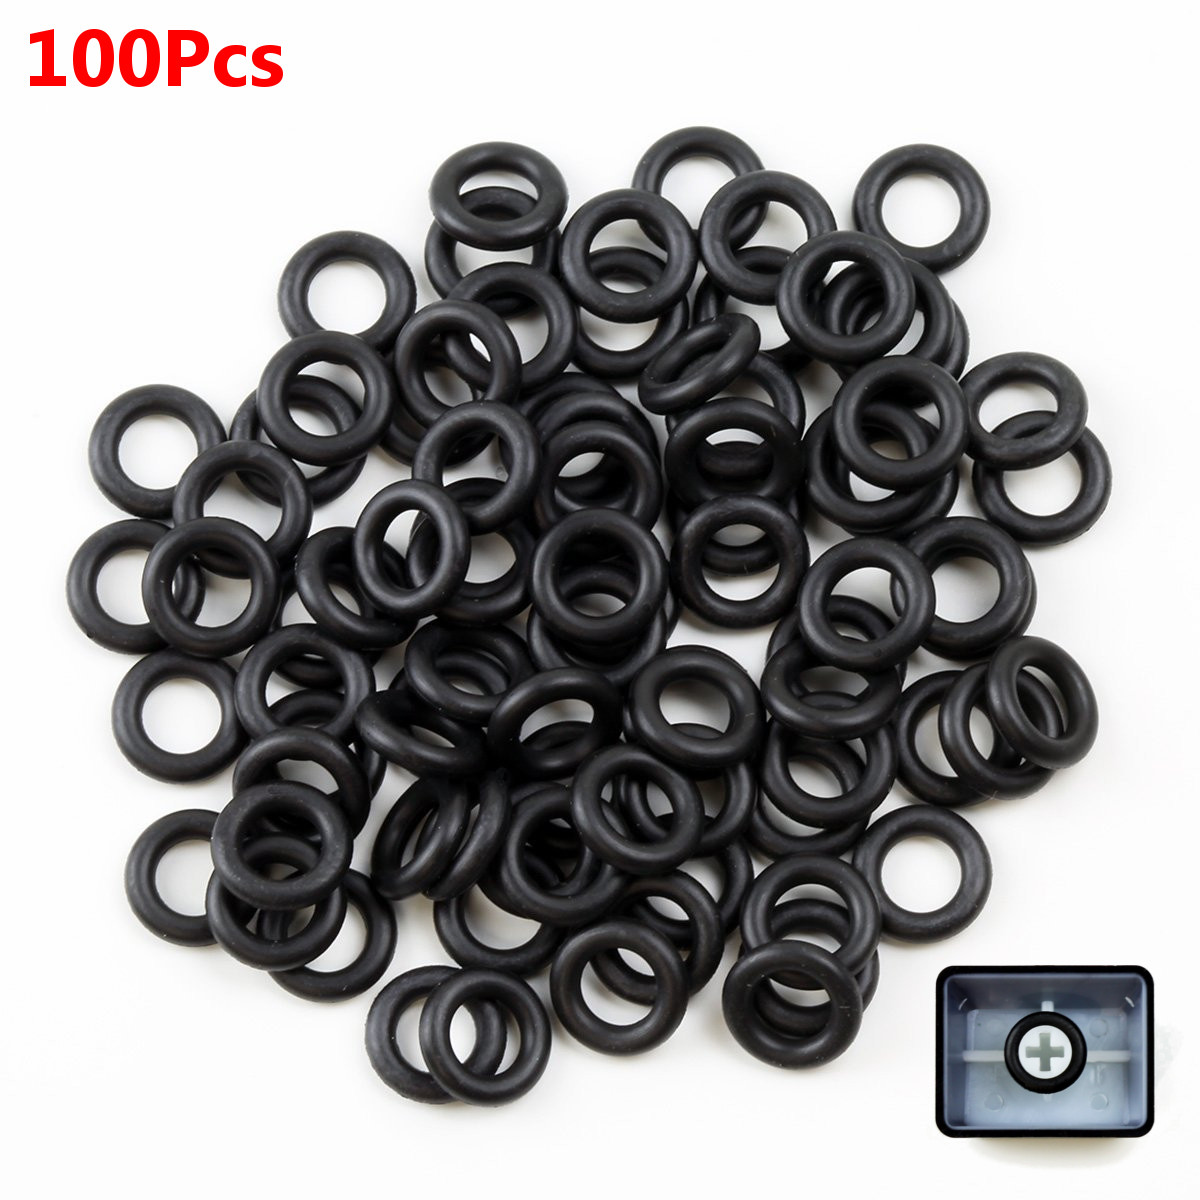 100 Mechanical Keyboard Keycap Rubber O-Ring Switch Dampeners for Cherry MX 29